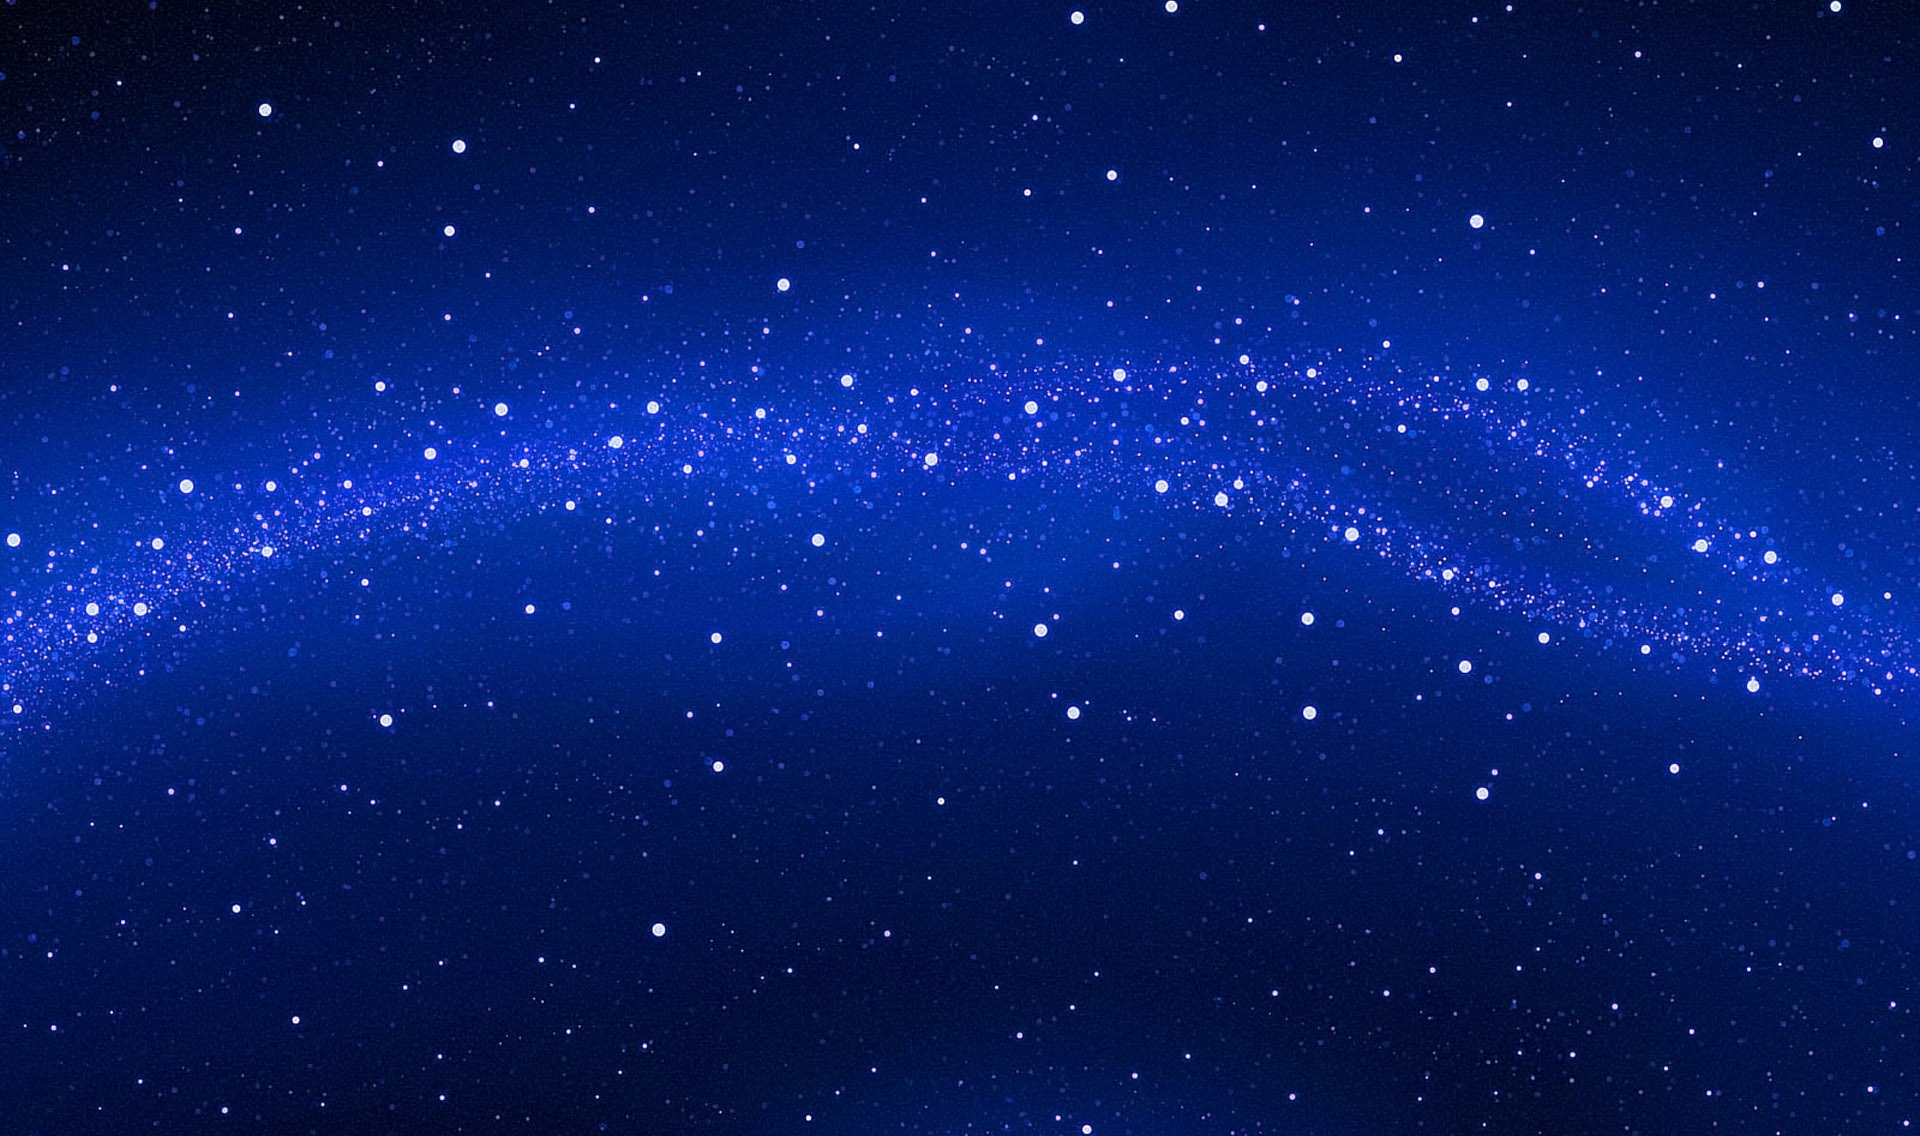 1 Night Sky HD Wallpapers | Background Images - Wallpaper Abyss